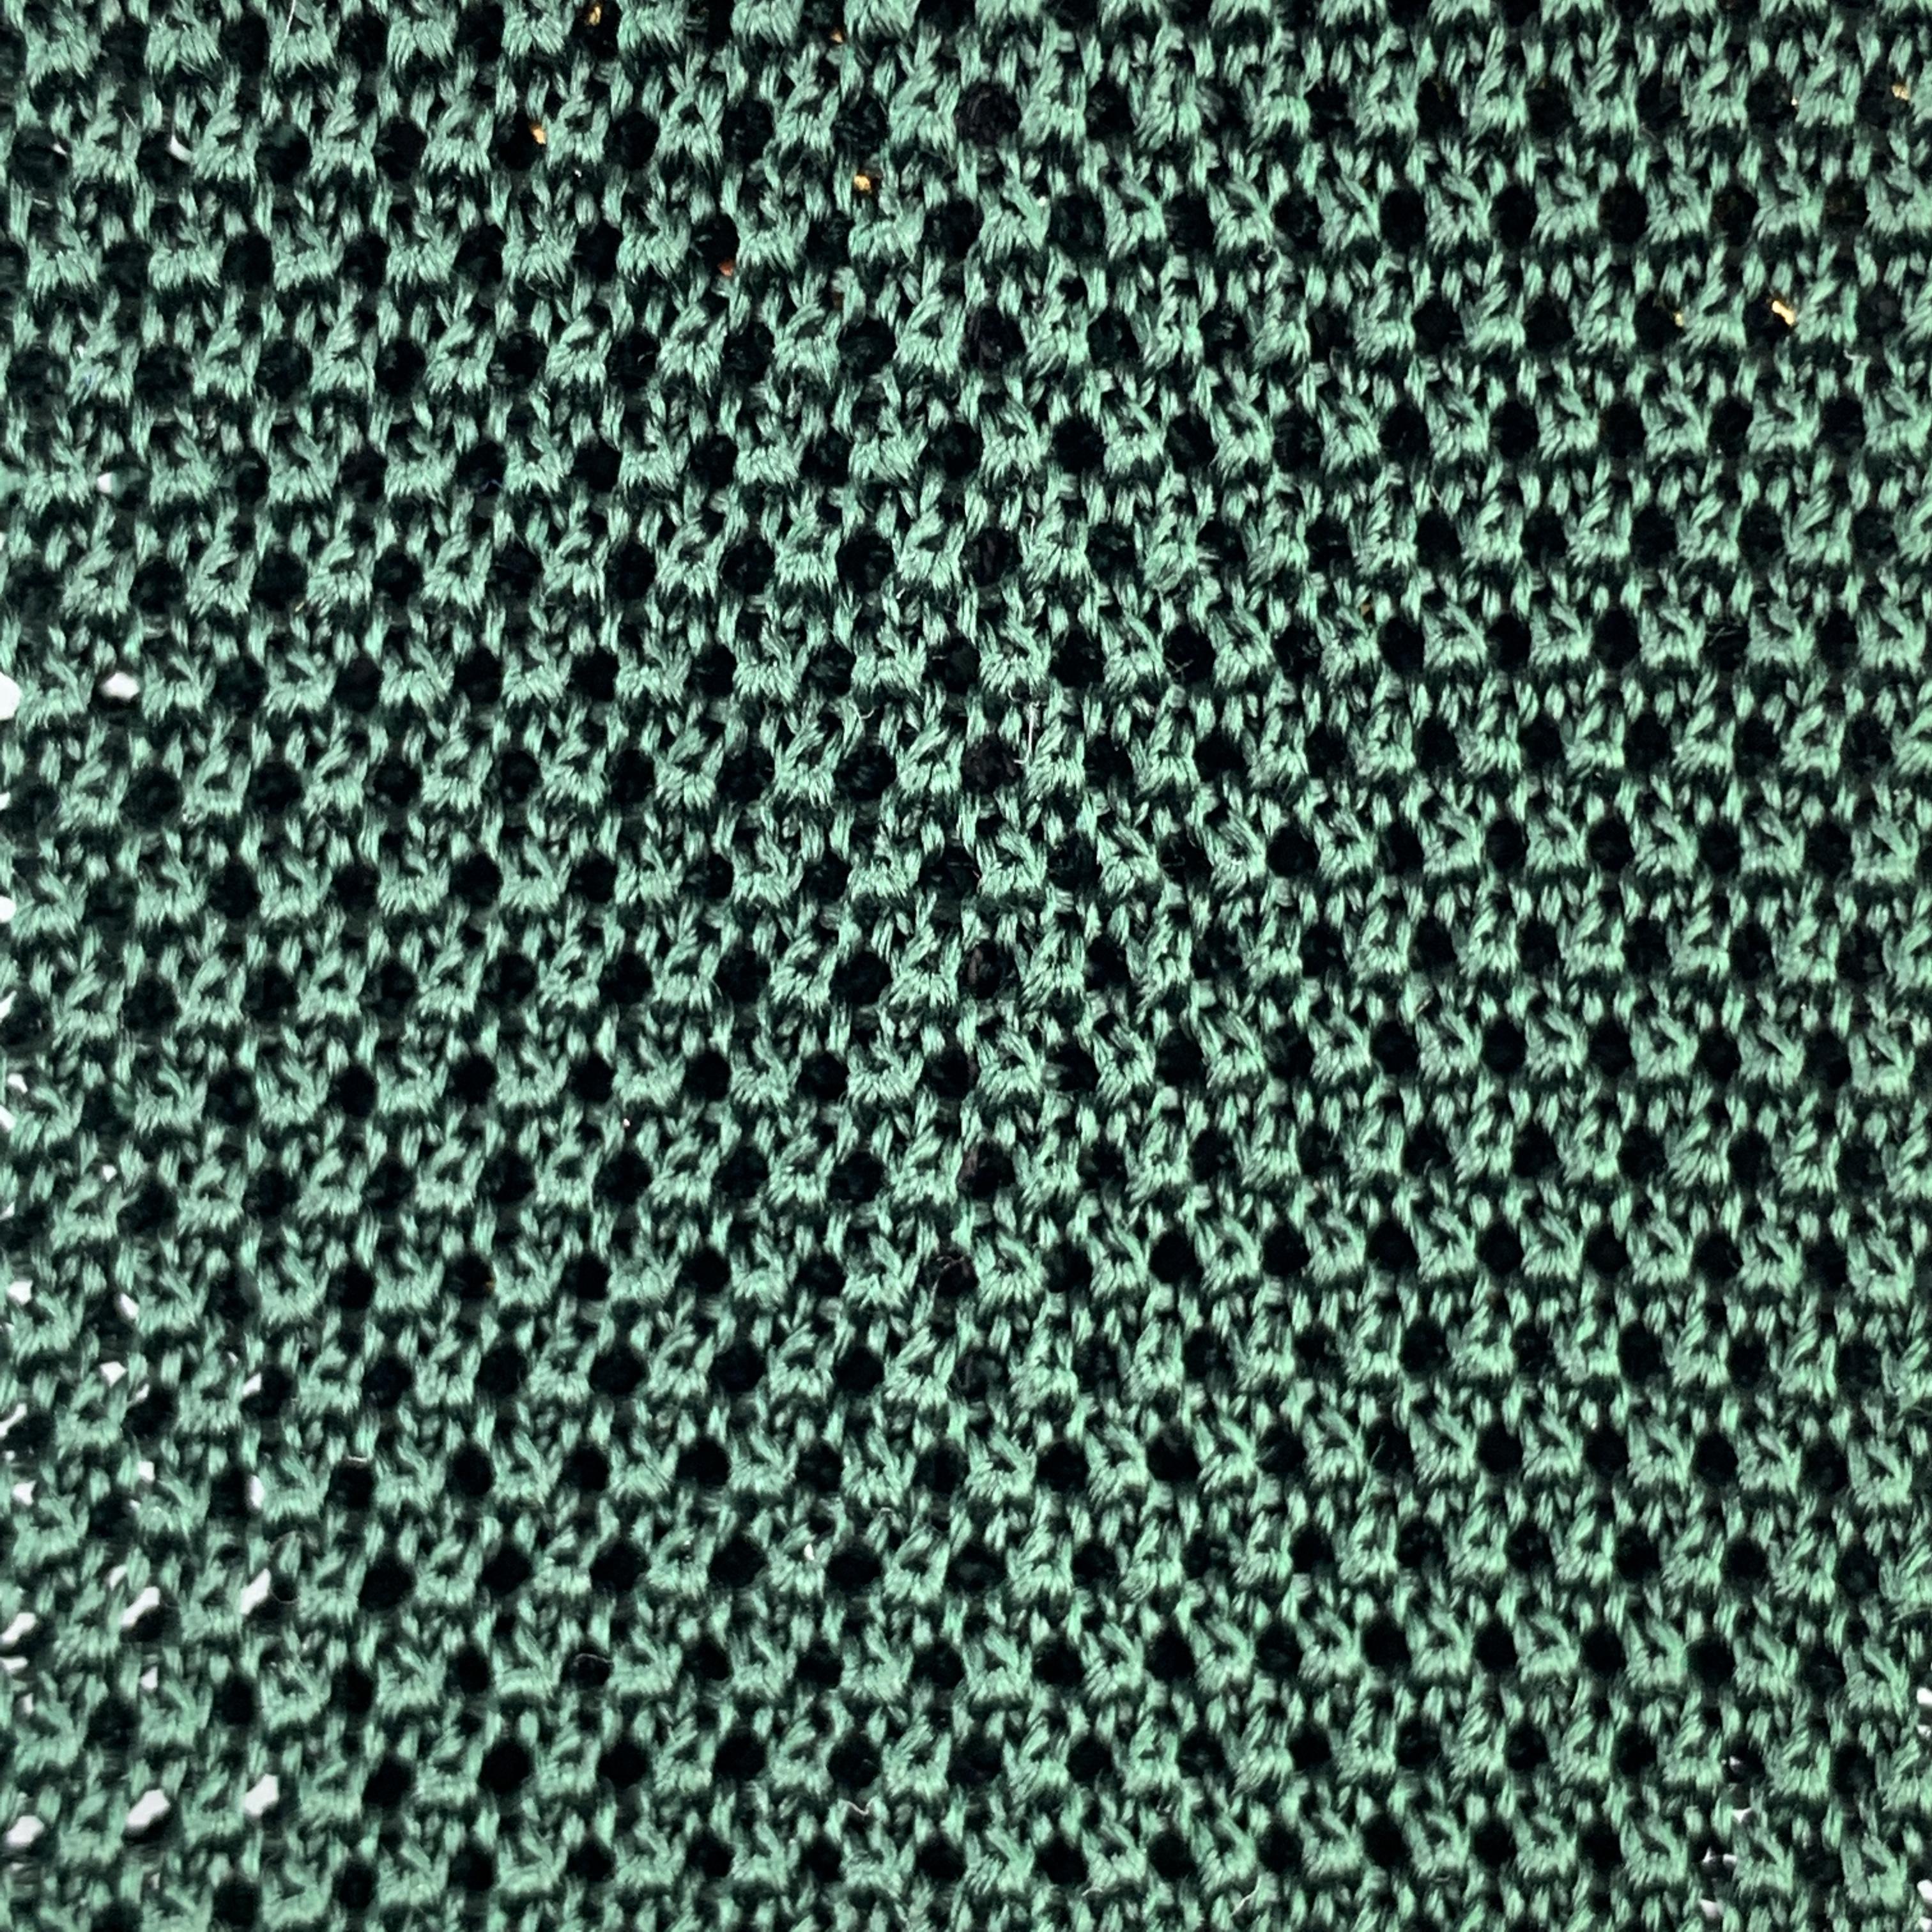 NEW & LINGWOOD necktie comes in a forest green  knitted textured silk. Made in Italy. 

Excellent Pre-Owned Condition.

Width: 2.7 in 